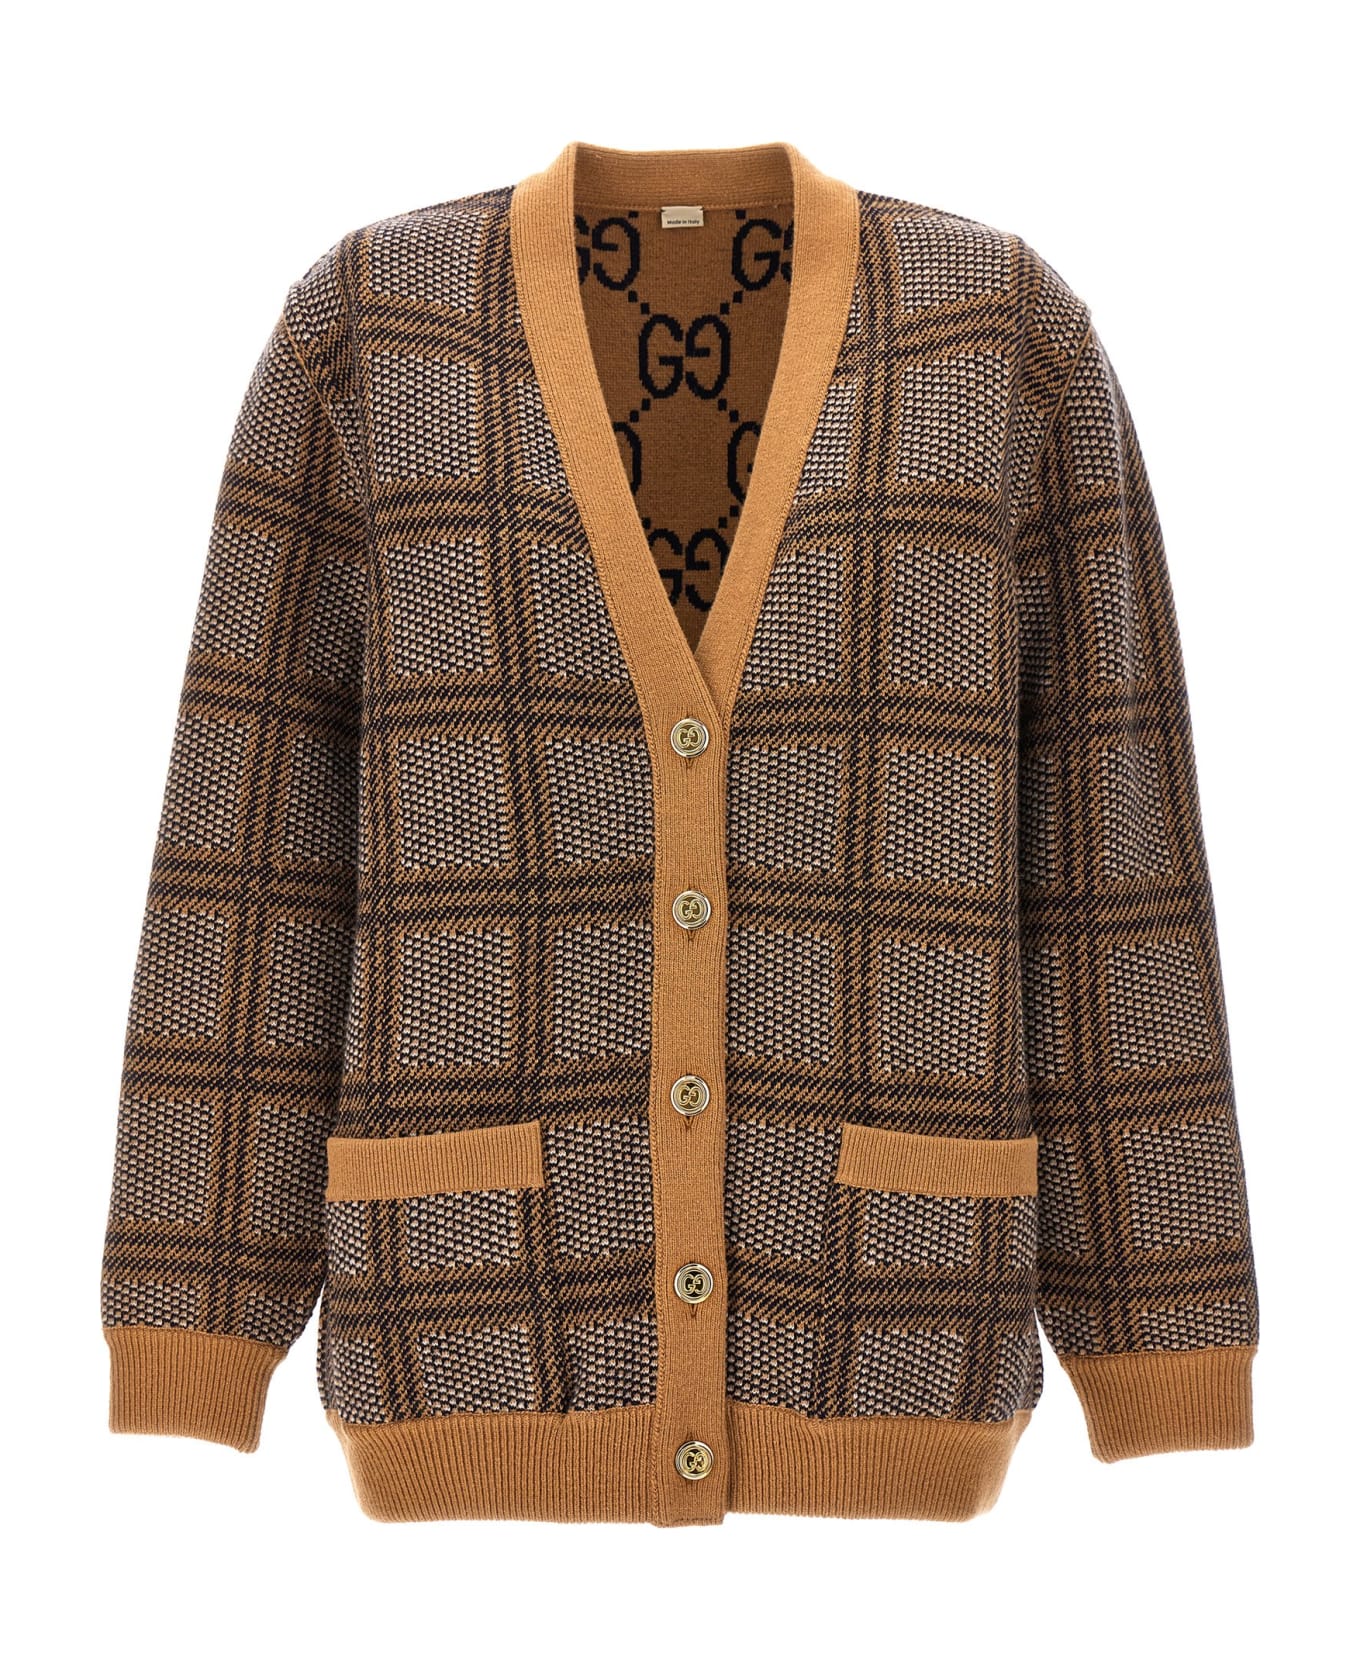 Gucci Check And 'gg' Reversible Cardigan - Beige